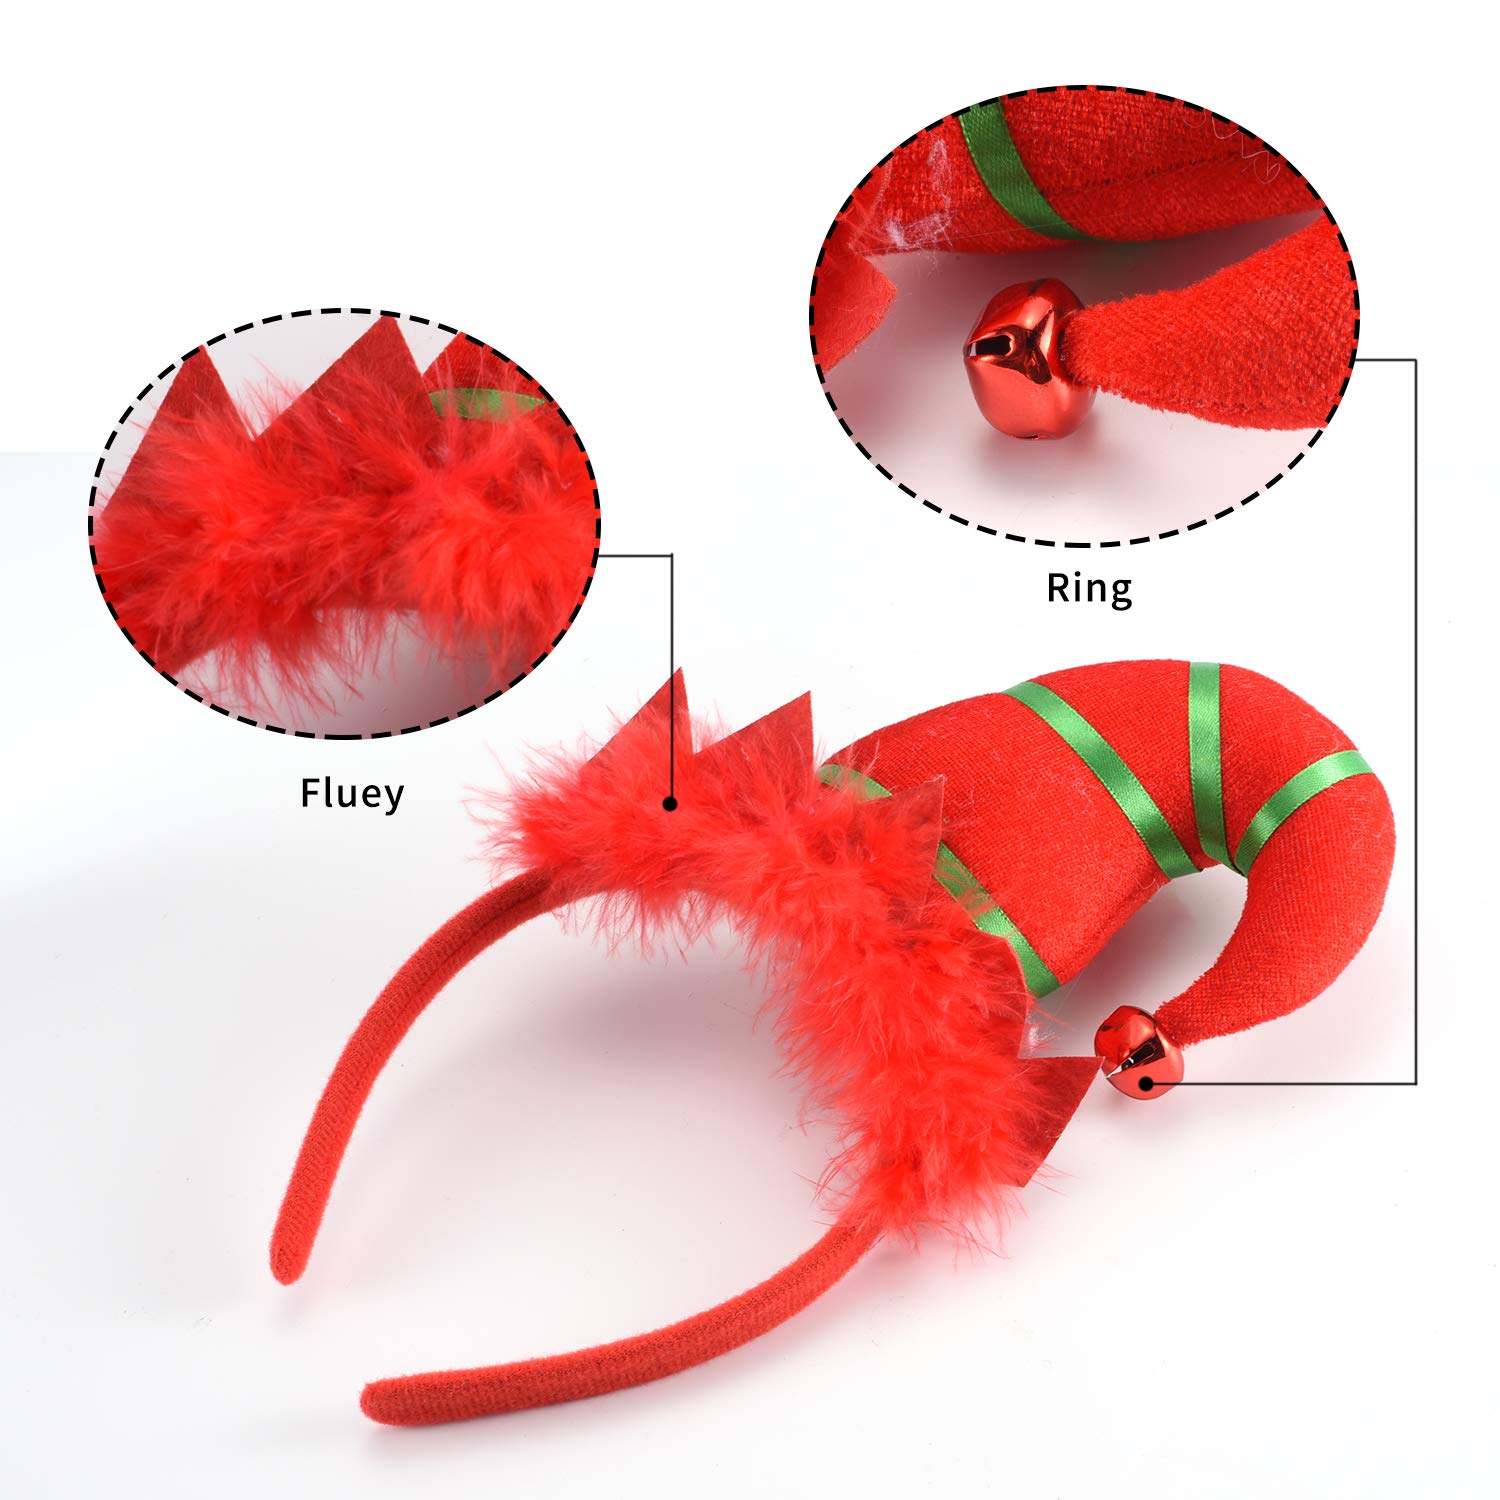 SEVEN STYLE 12 PCS Holiday Headbands,Cute Christmas head hat toppers,Great Fun and Festive for Annual Holiday and Seasons Themes, Christmas Party,Christmas Dinner,photos booth.